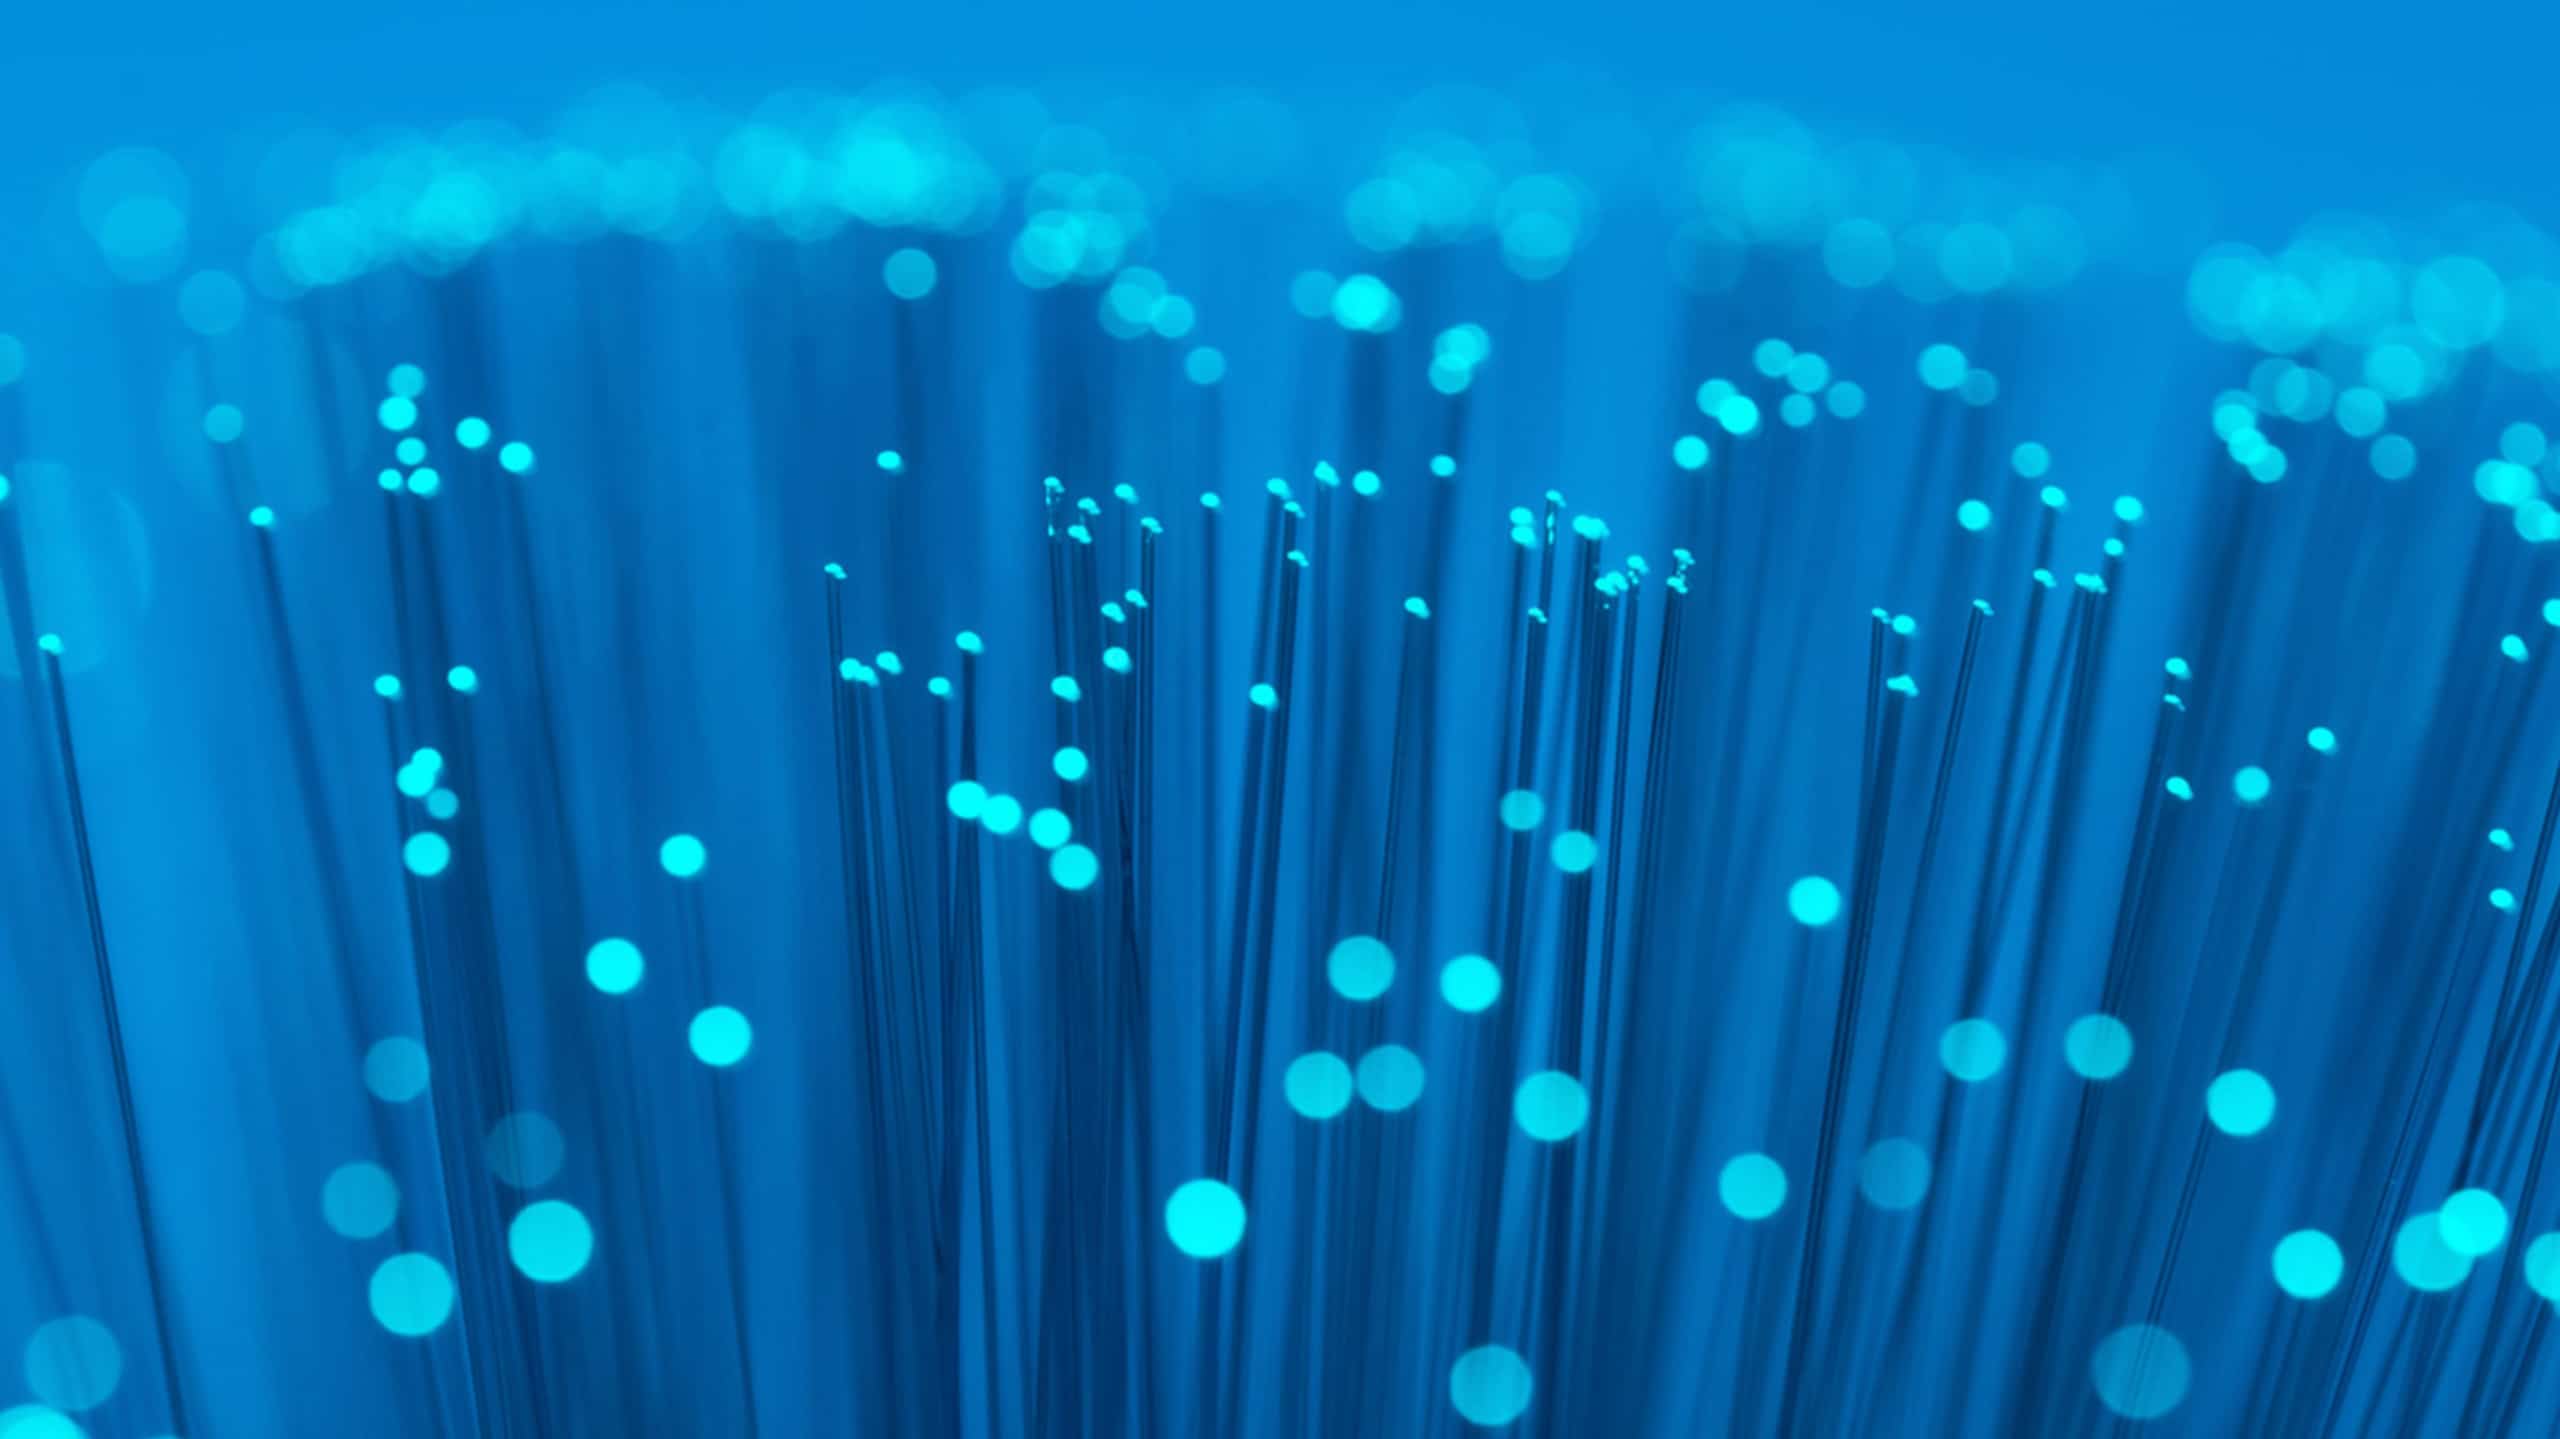 A close-up image of numerous fiber optic cables with illuminated blue tips against a deep blue background, symbolizing modern technology and data transmission.